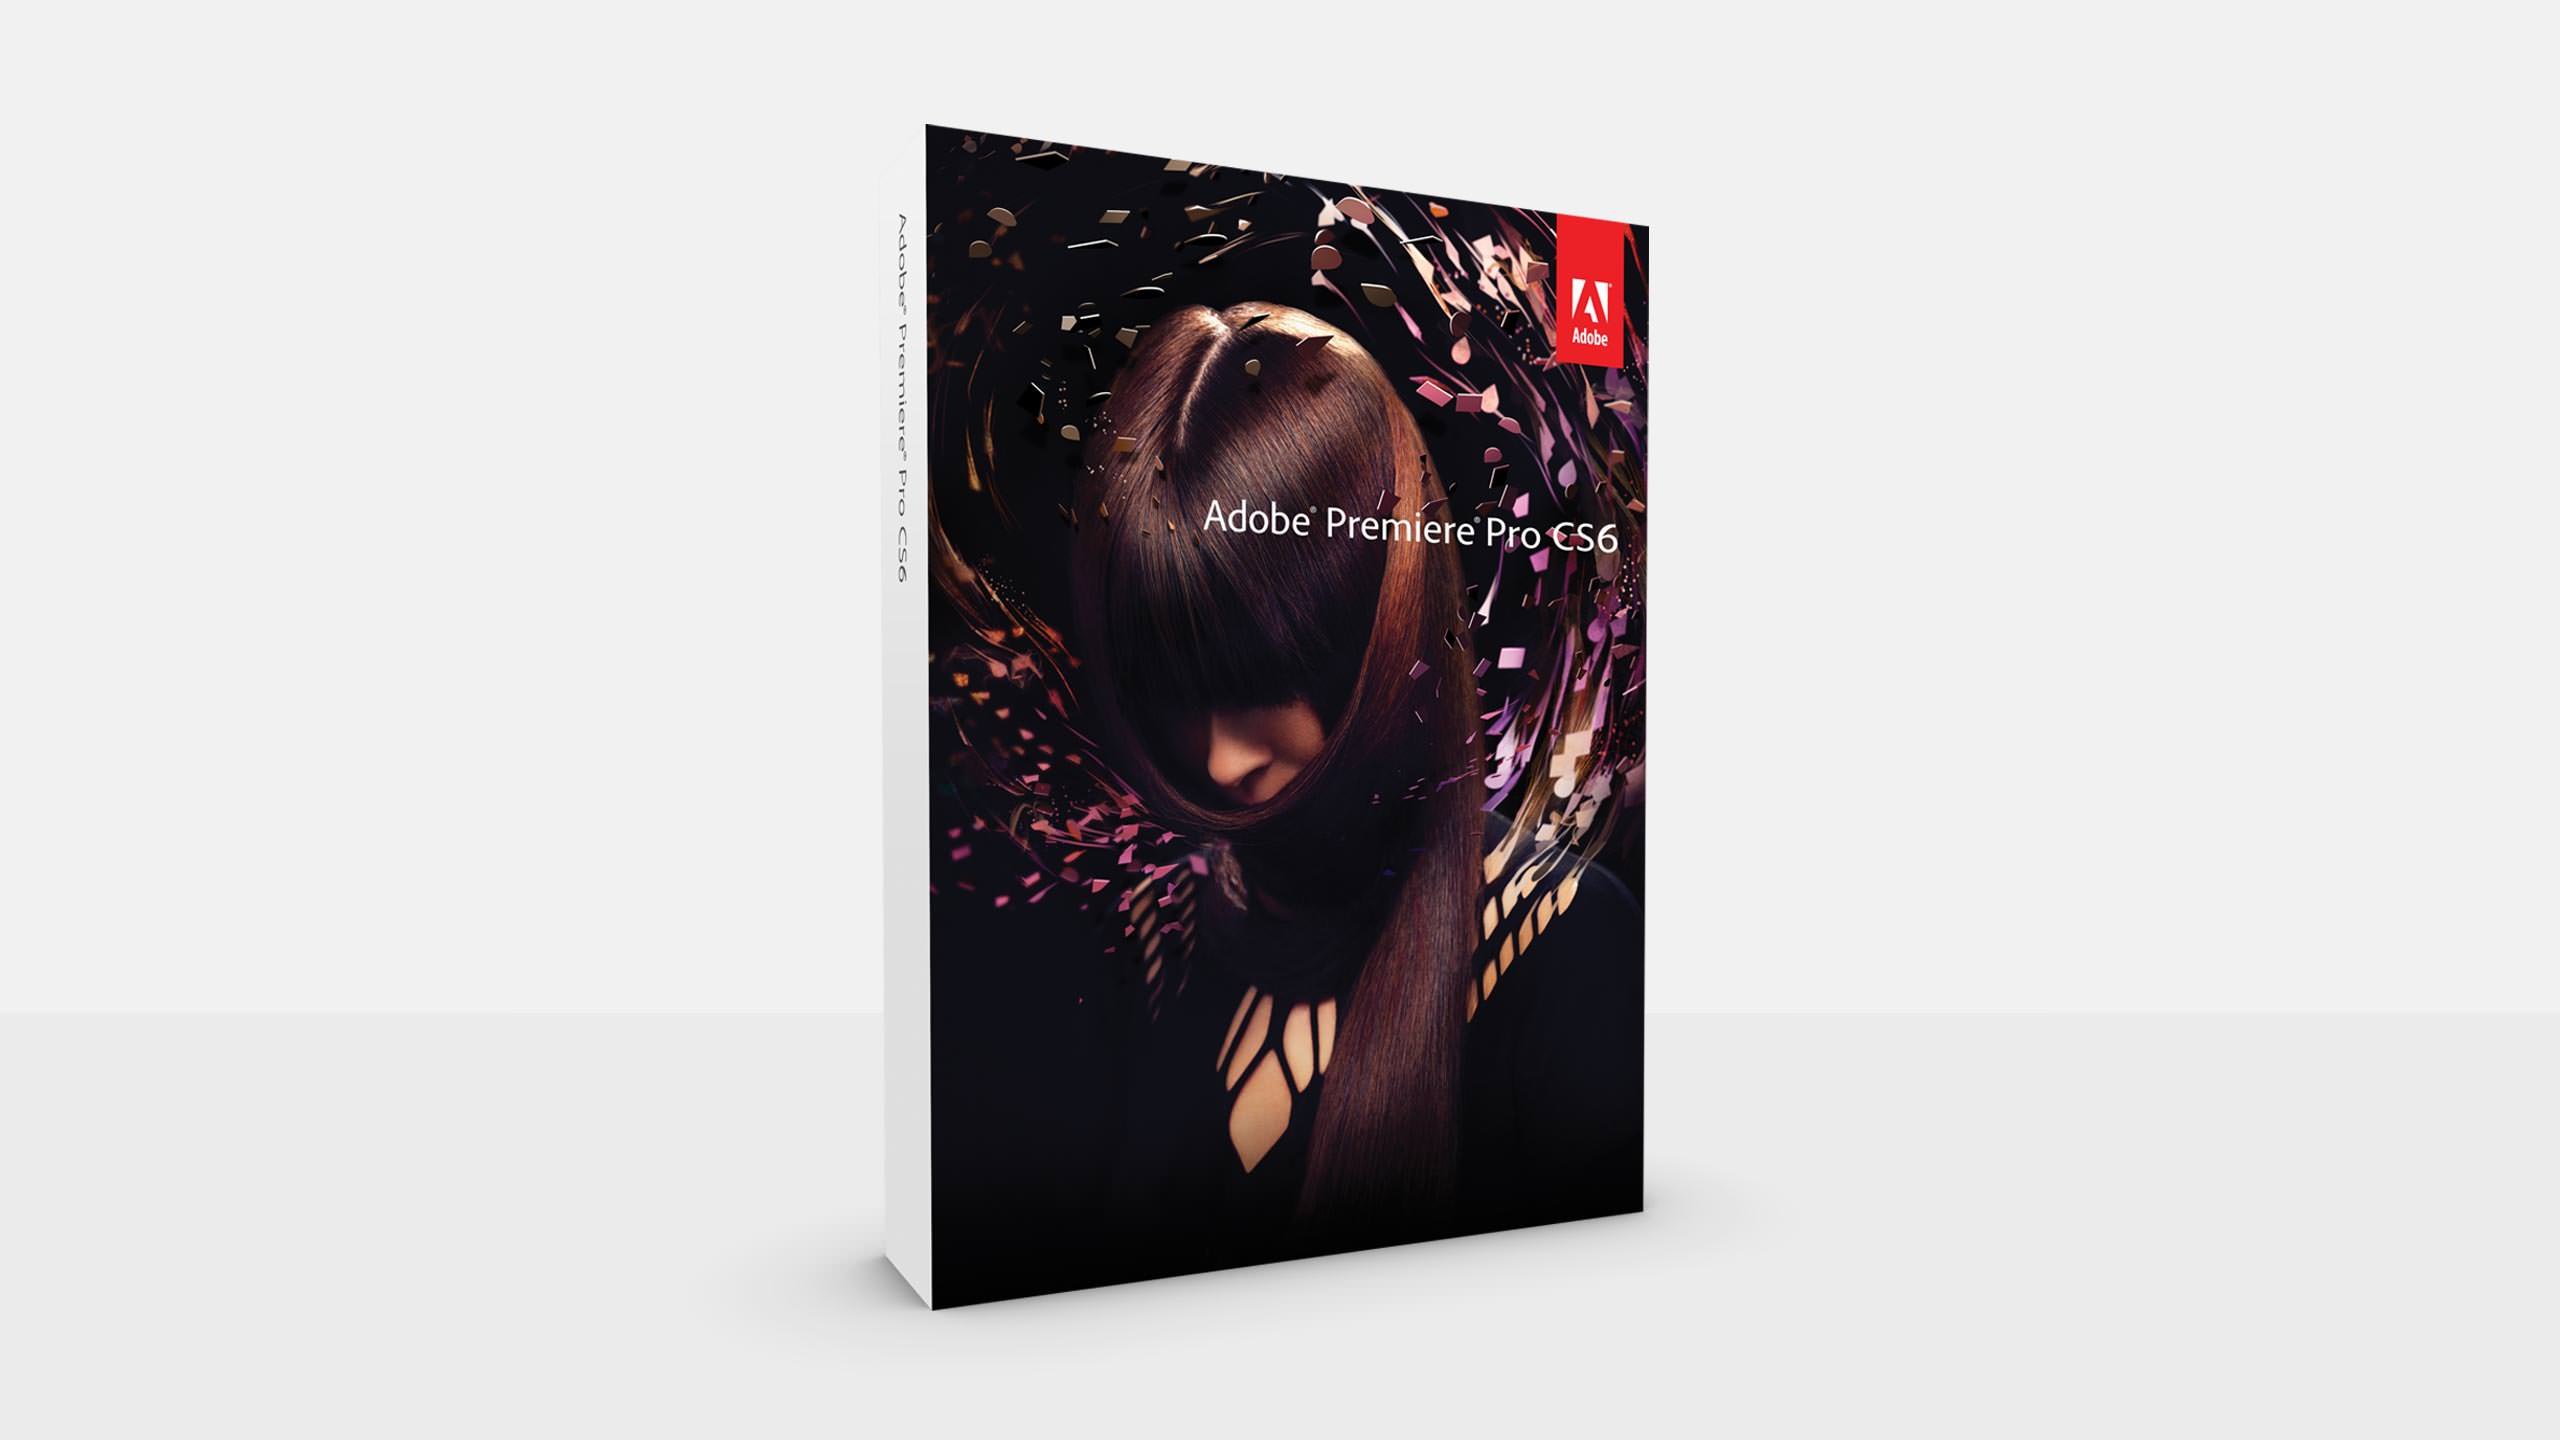 Adobe CS6 Premiere Pro Product Packaging